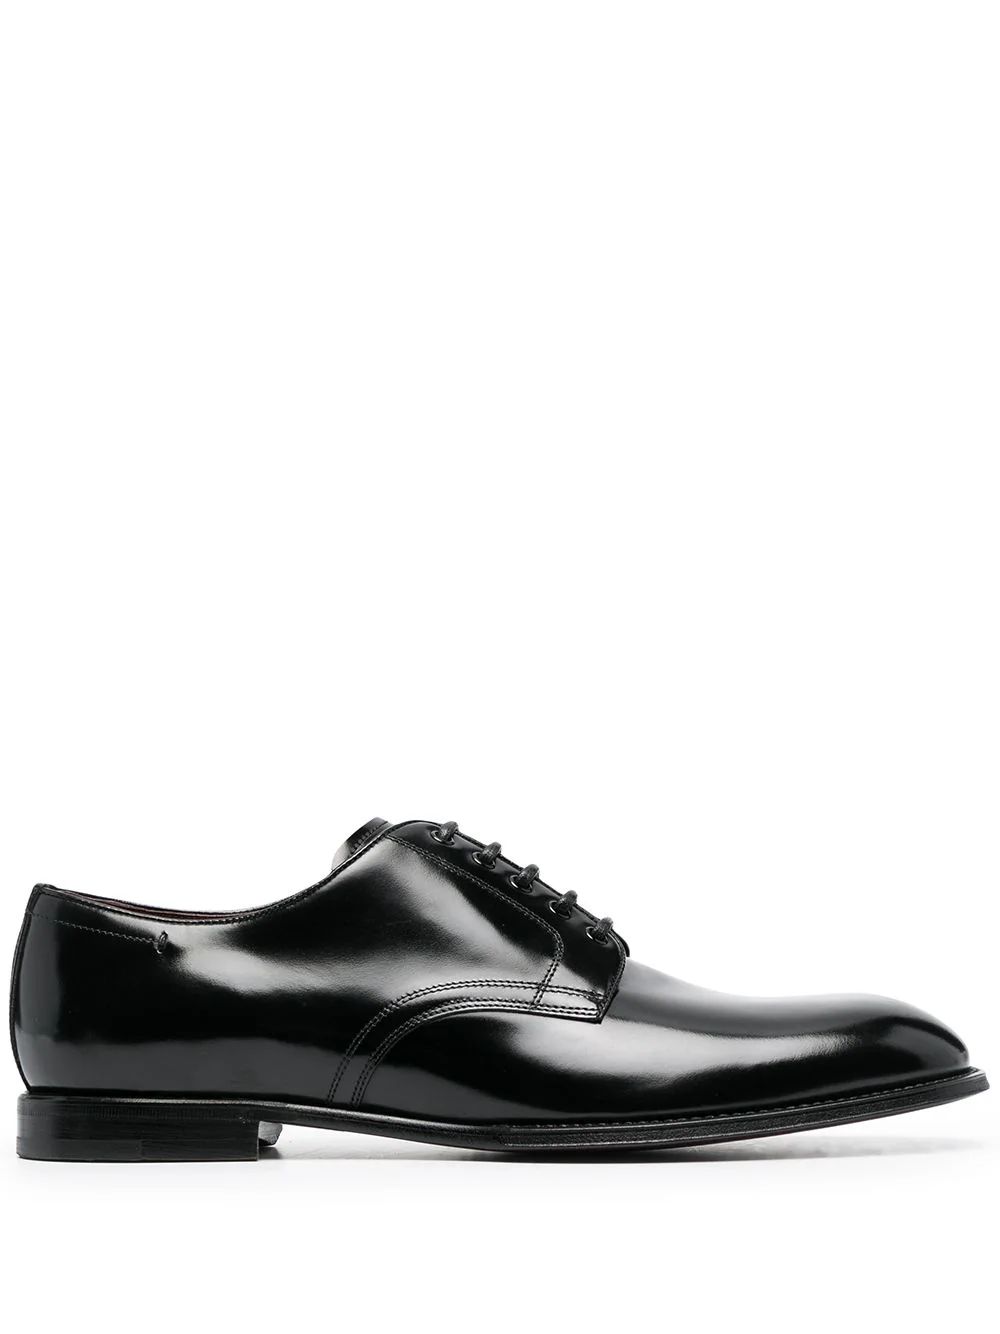 The DetailsDolce & GabbanaMichelangelo patent-leather derby shoesWhen occasions with a smart dres... | Farfetch Global